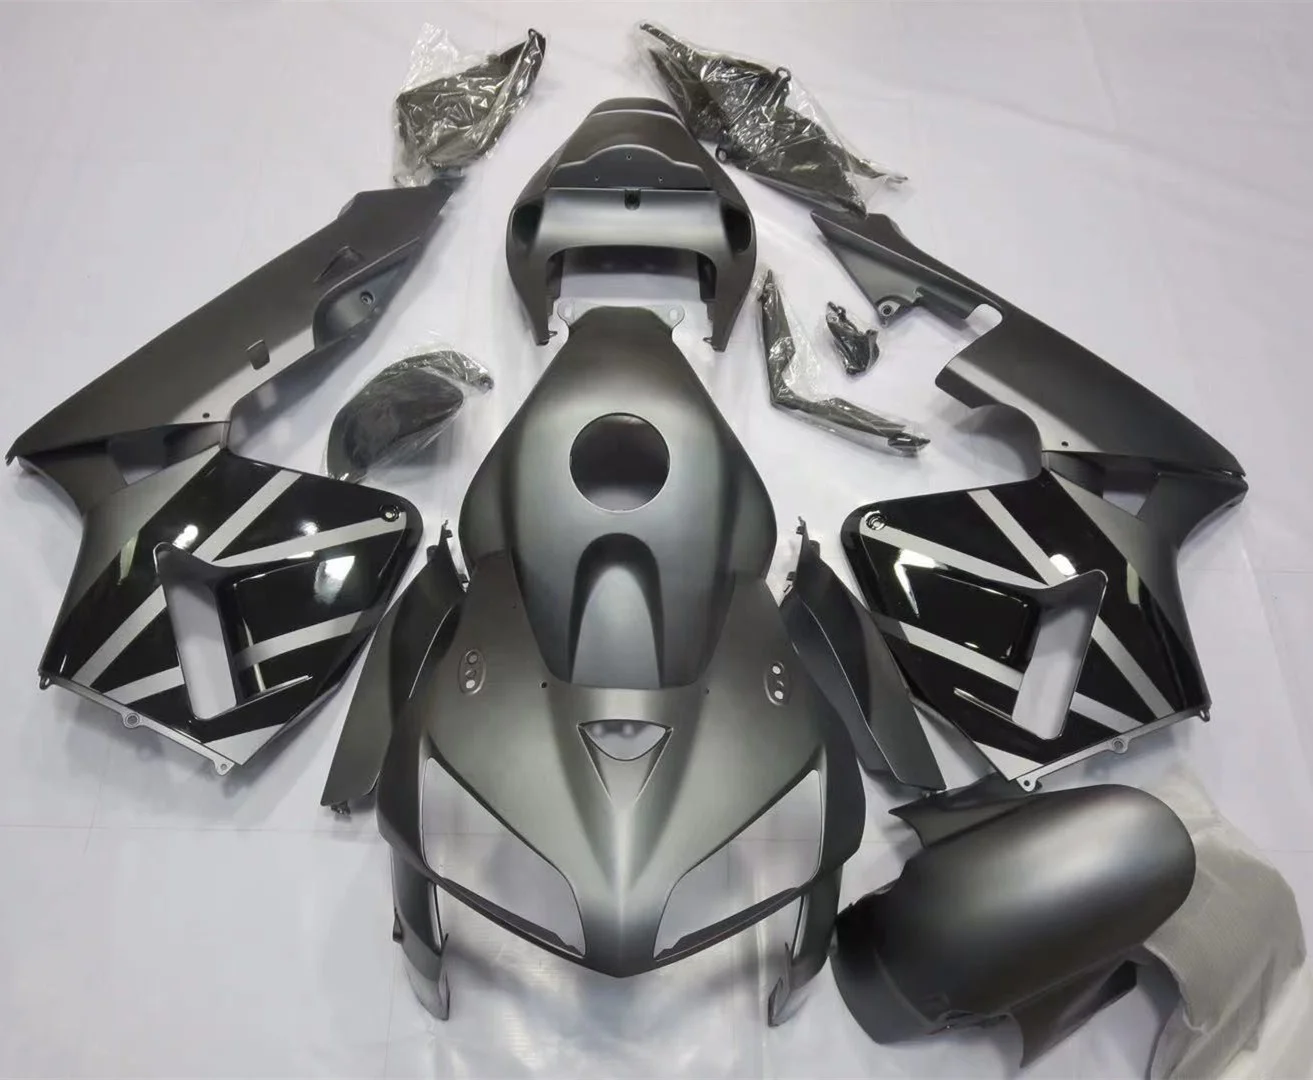 

2022 WHSC Motorcycle Fairing Fit For HONDA CBR600 2005-2006 ABS Plastic Bodywork Gray Black, Pictures shown